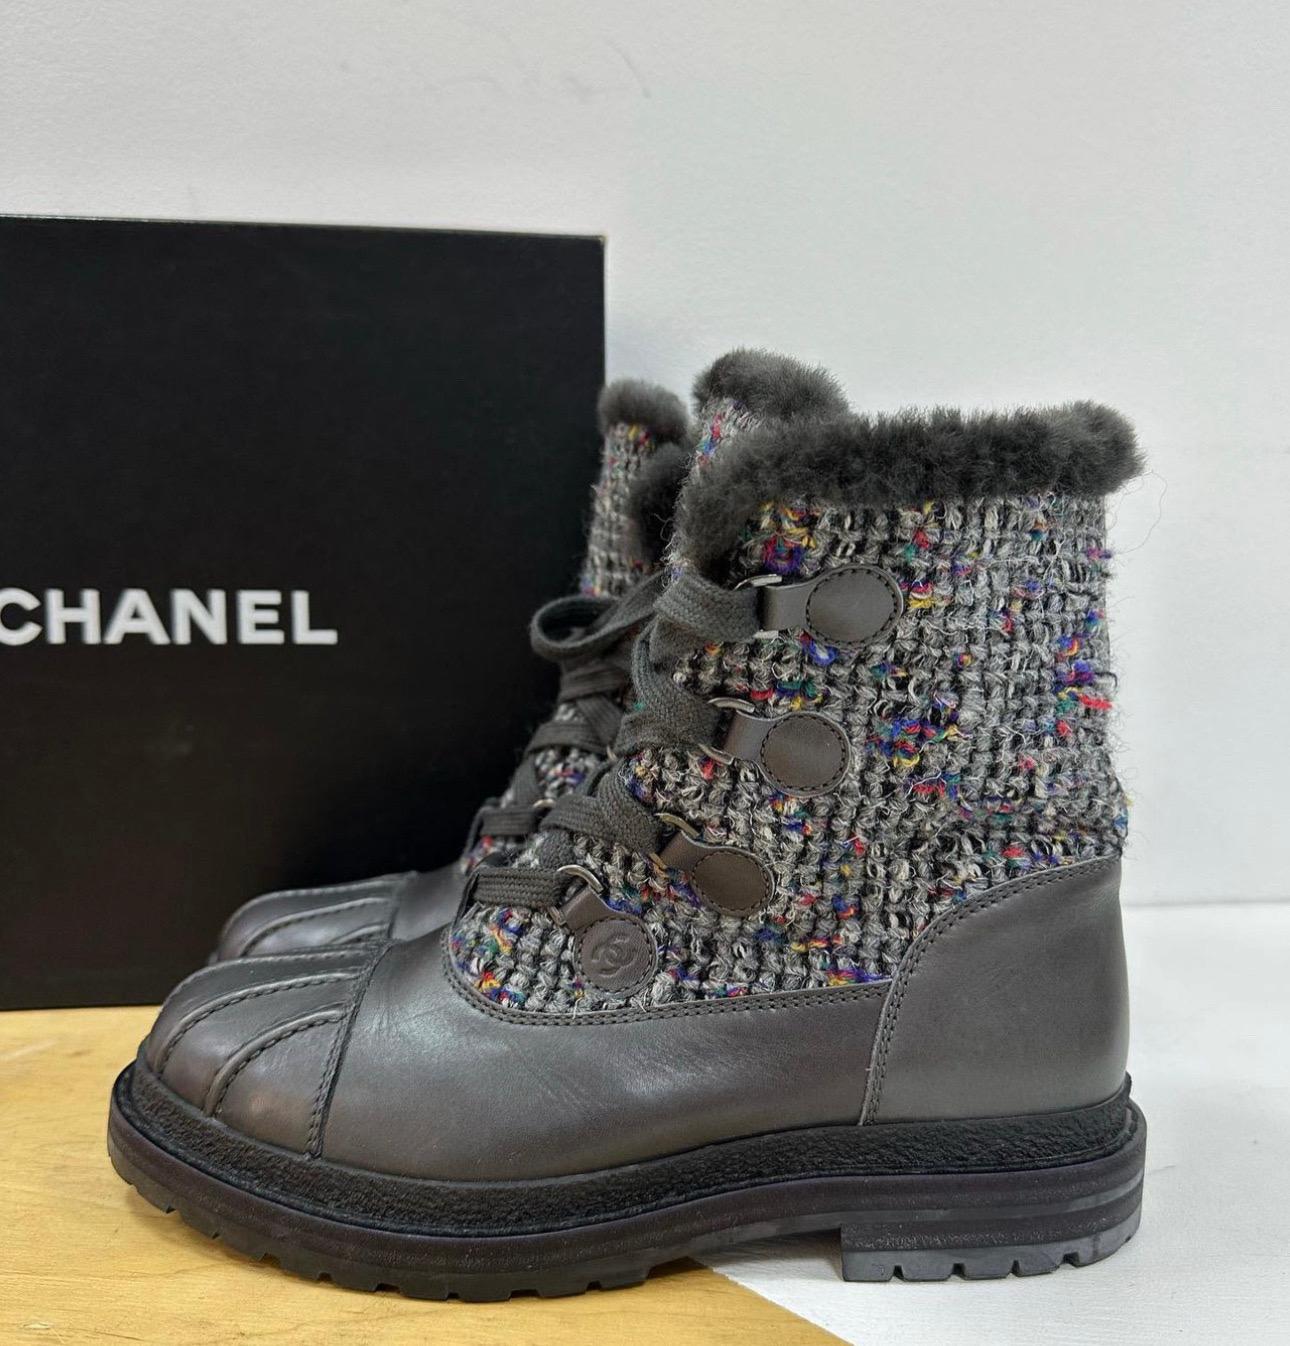 Chanel 2016 shearling lined tweed and leather ankle boots. 
Grey, blue, red and yellow.
Lace up fastening at front. 
Very good condition. Signs of wear seen on pics.
Does not come with box or dustbag.